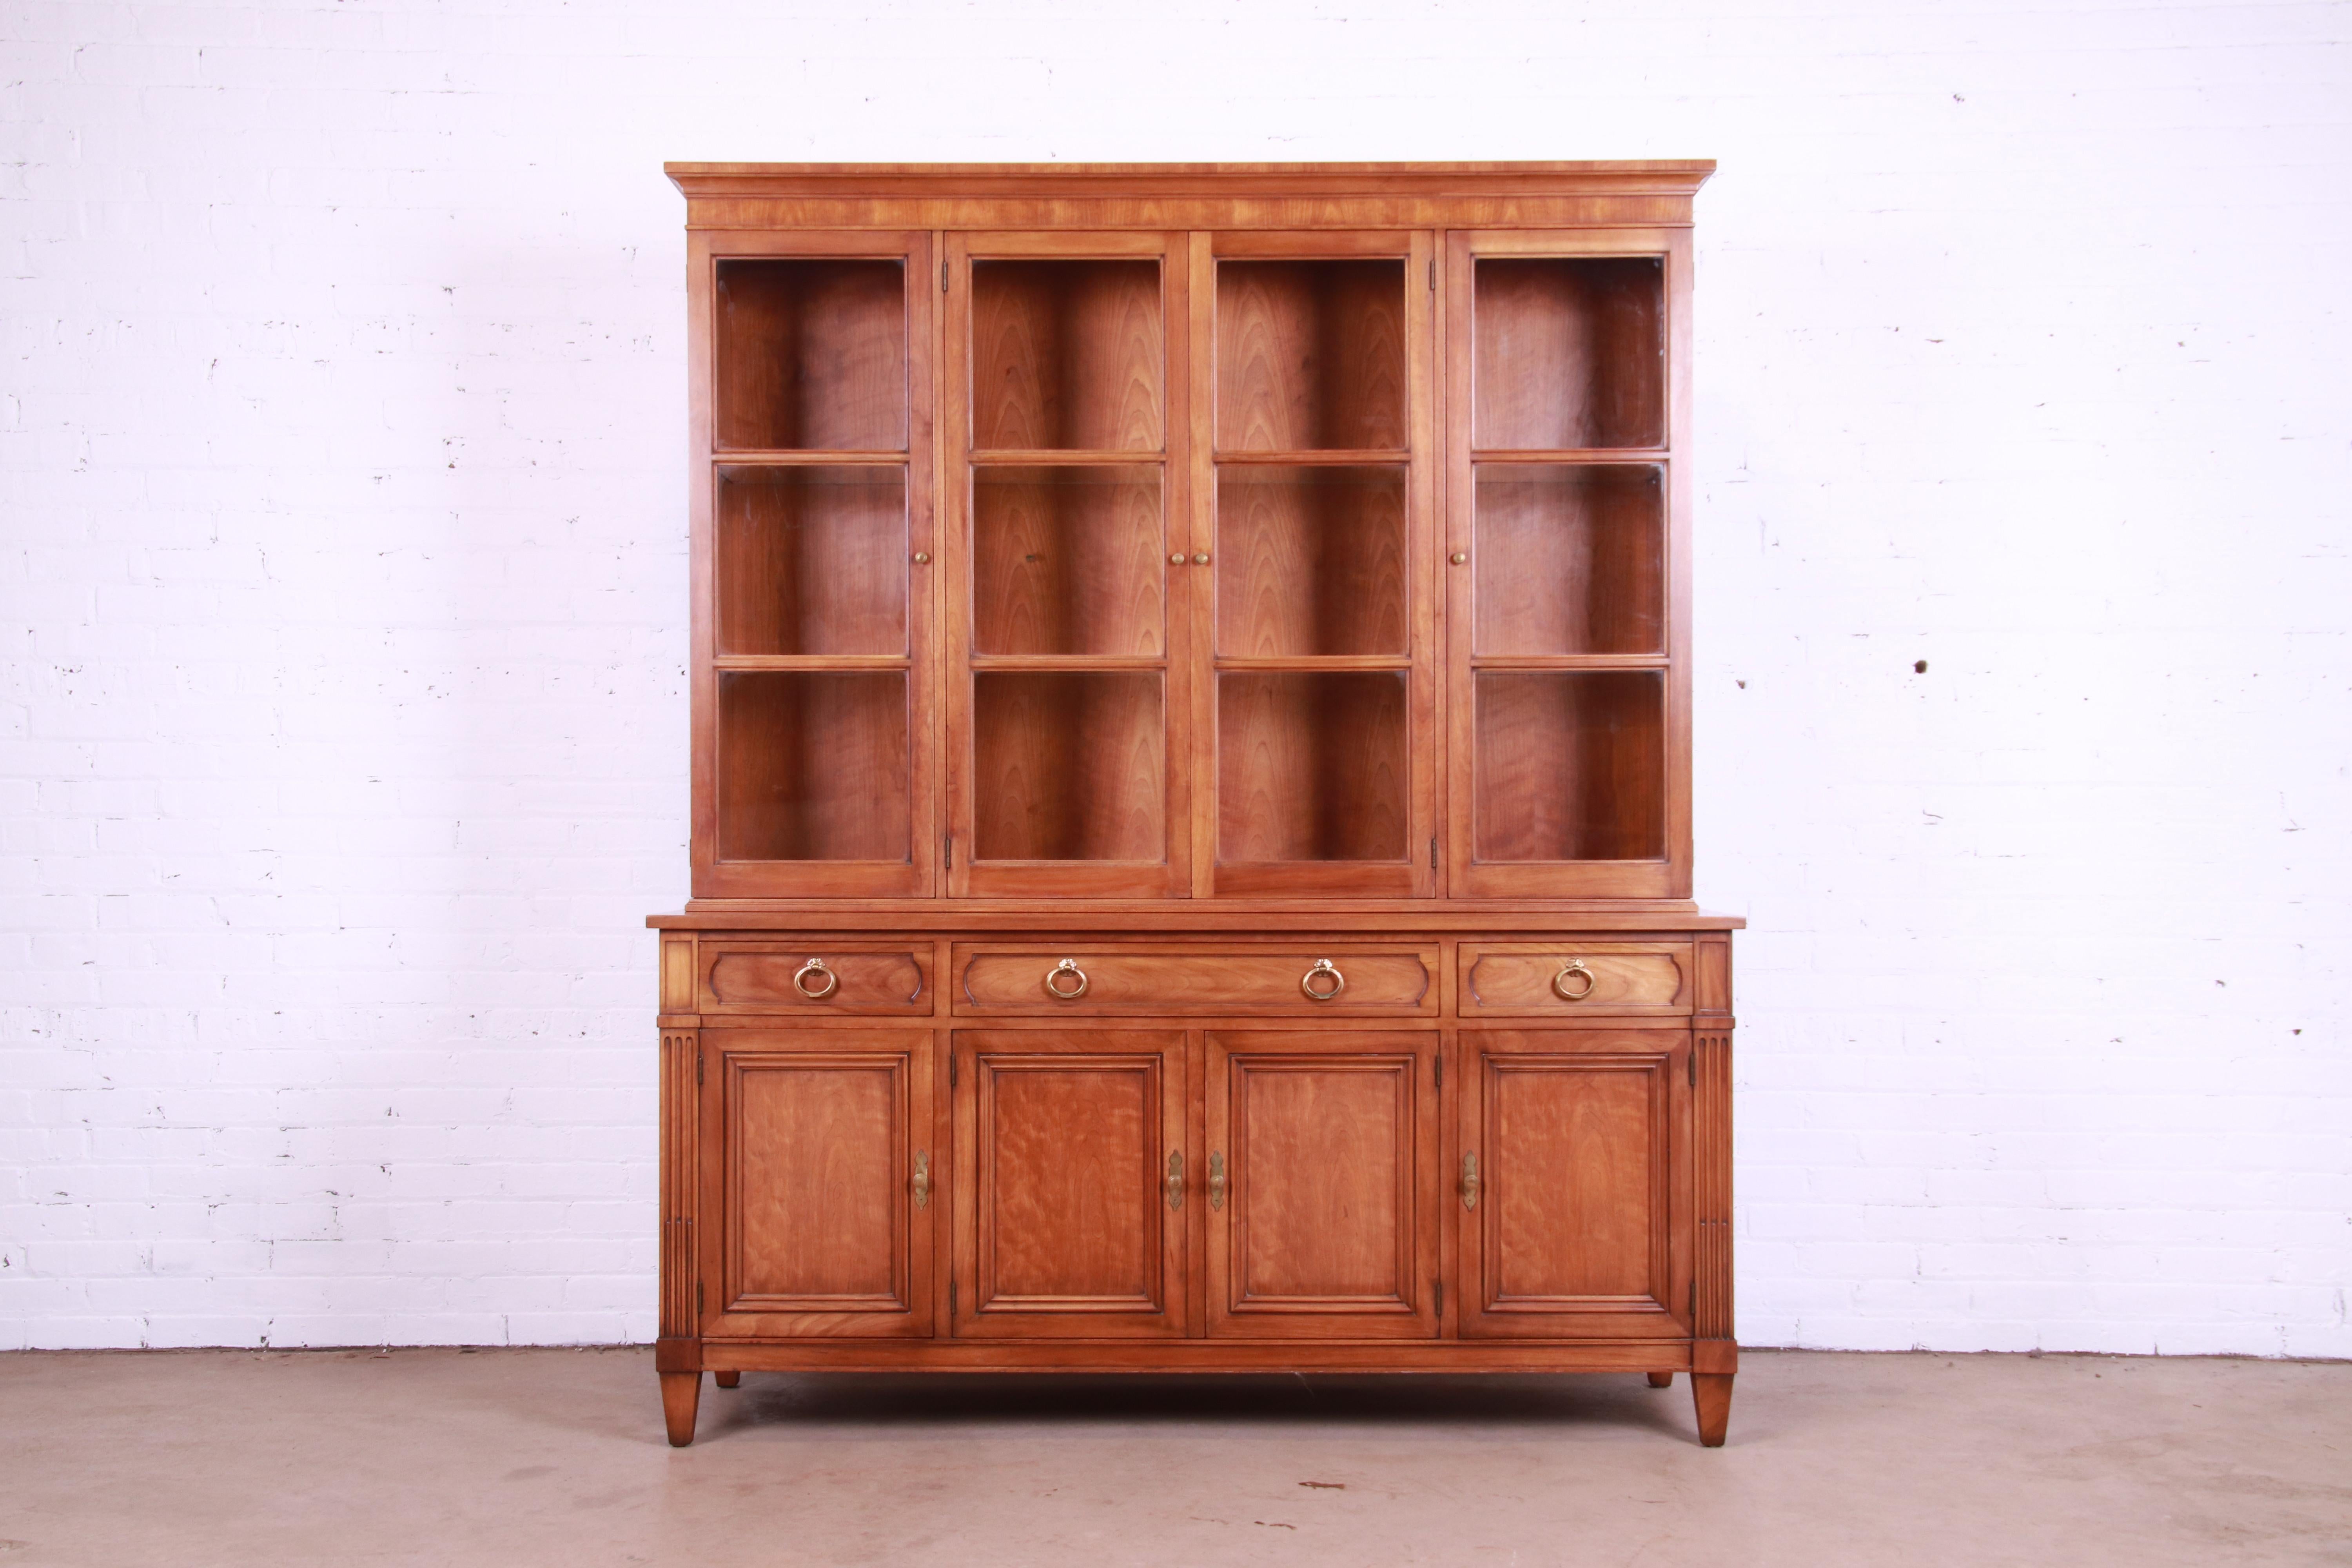 Kindel Furniture Mid-Century French Regency Cherry Breakfront Bookcase Cabinet In Good Condition For Sale In South Bend, IN